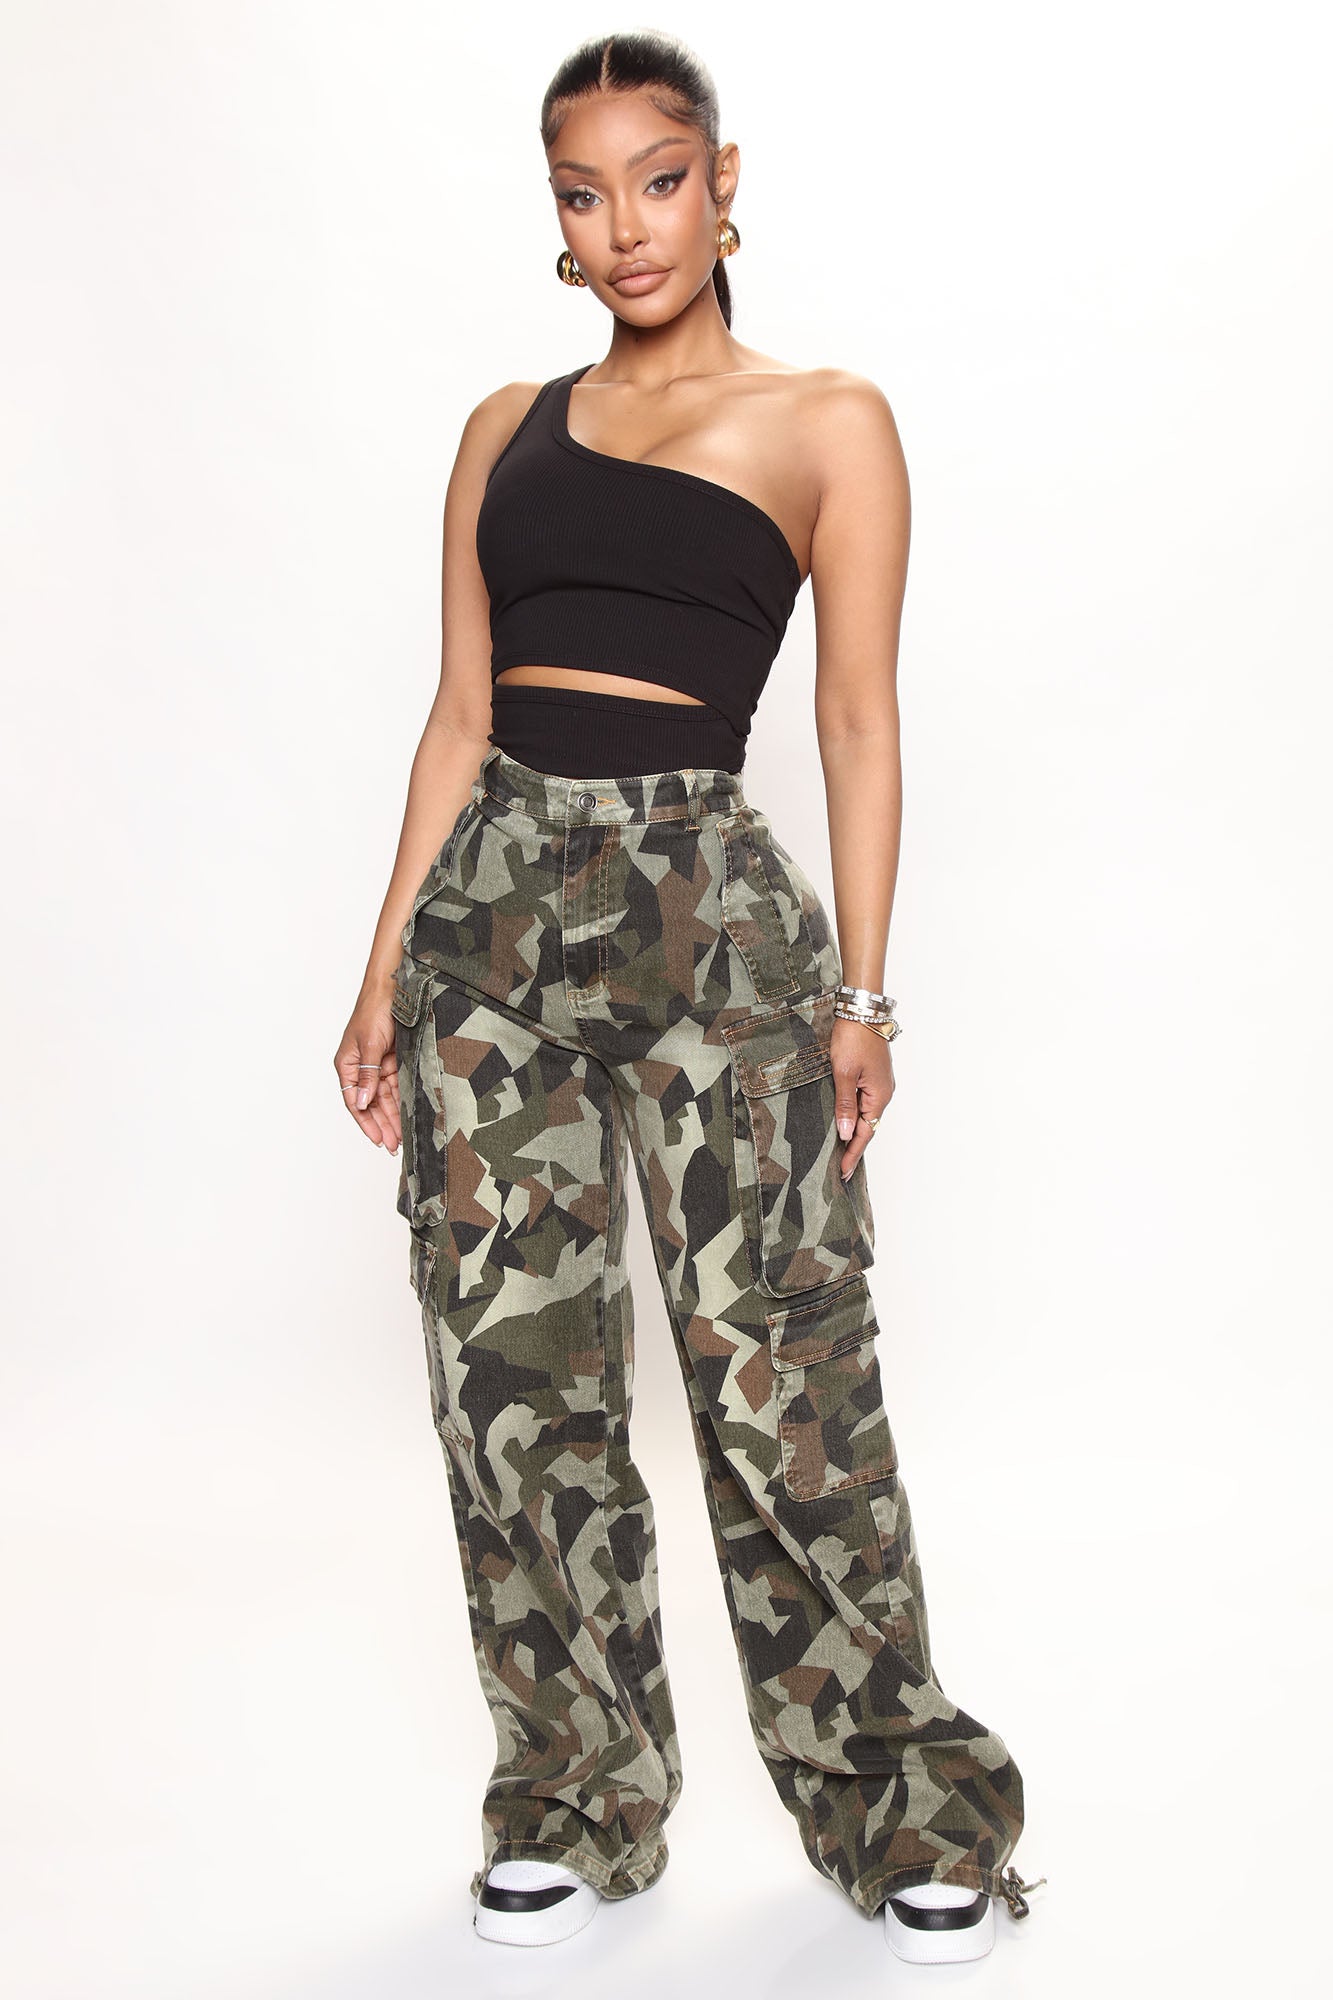 Camouflage cargo trousers - Women's fashion